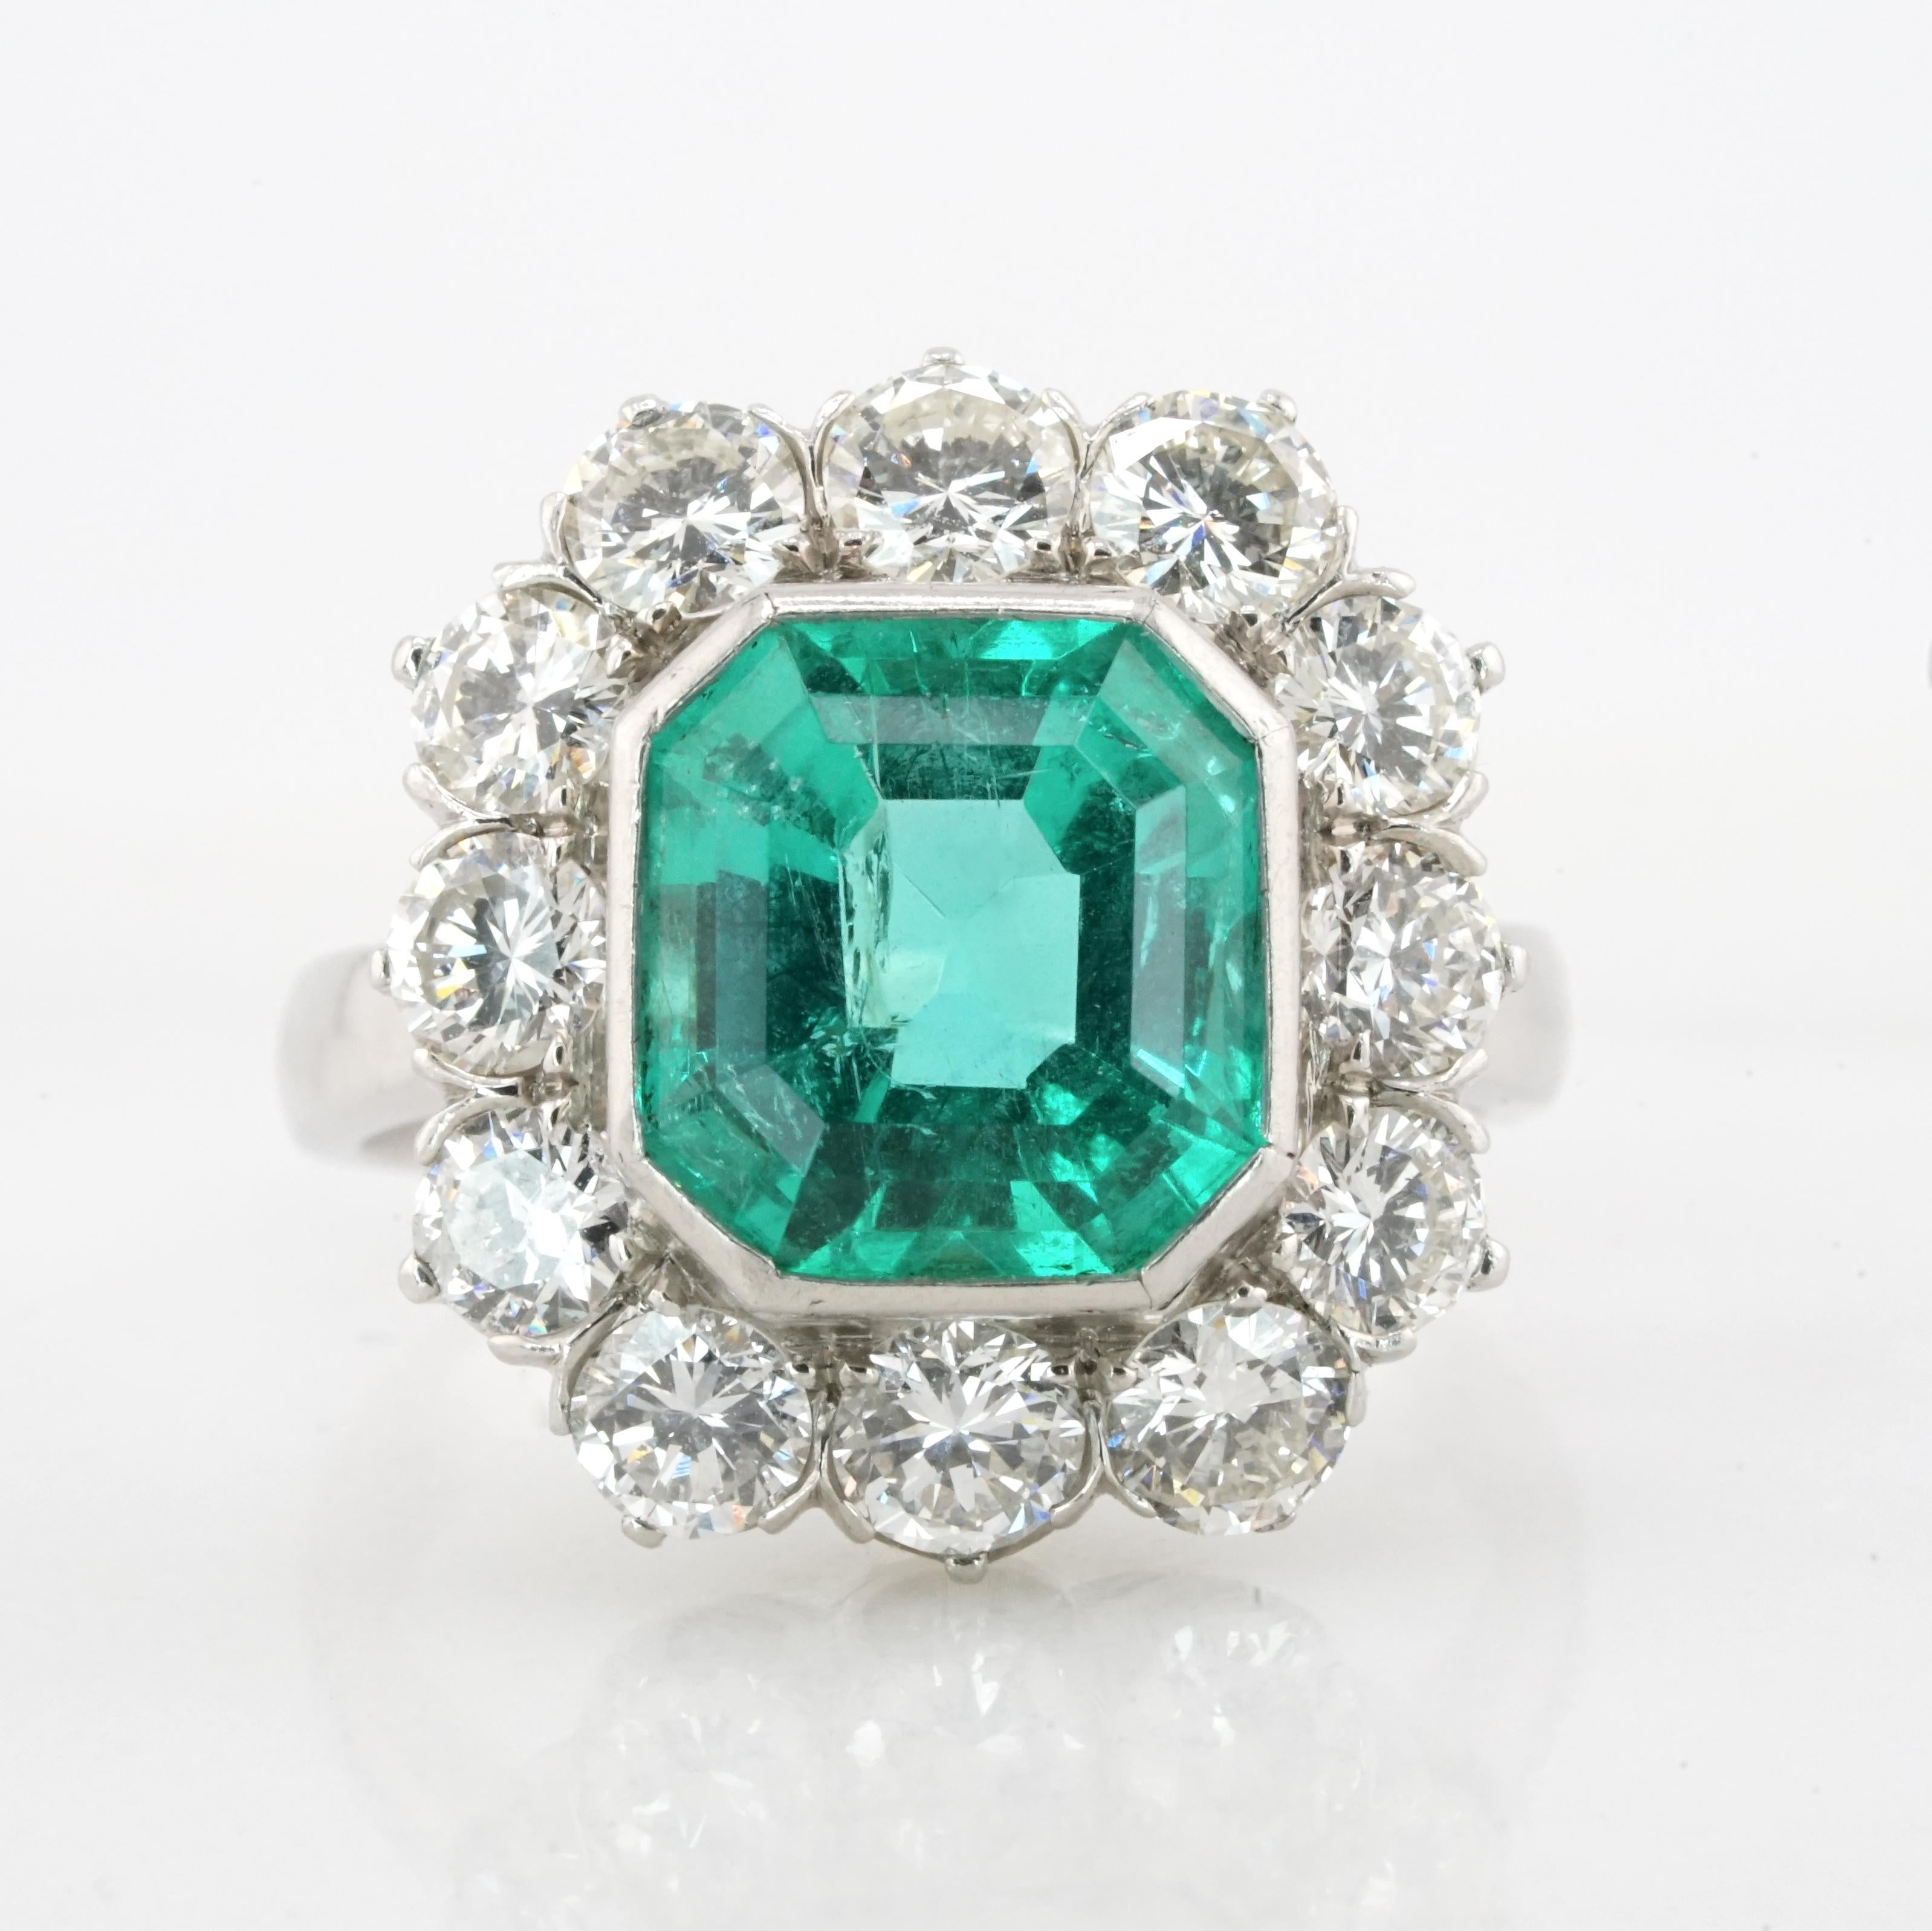 This magnificent ring, crafted by Antinori Di Sanpietro, features a striking octagonal step-cut emerald as its centerpiece, radiating an enchanting green hue. Weighing 3.55 carats, this natural beryl emerald hails from the lush regions of Colombia,